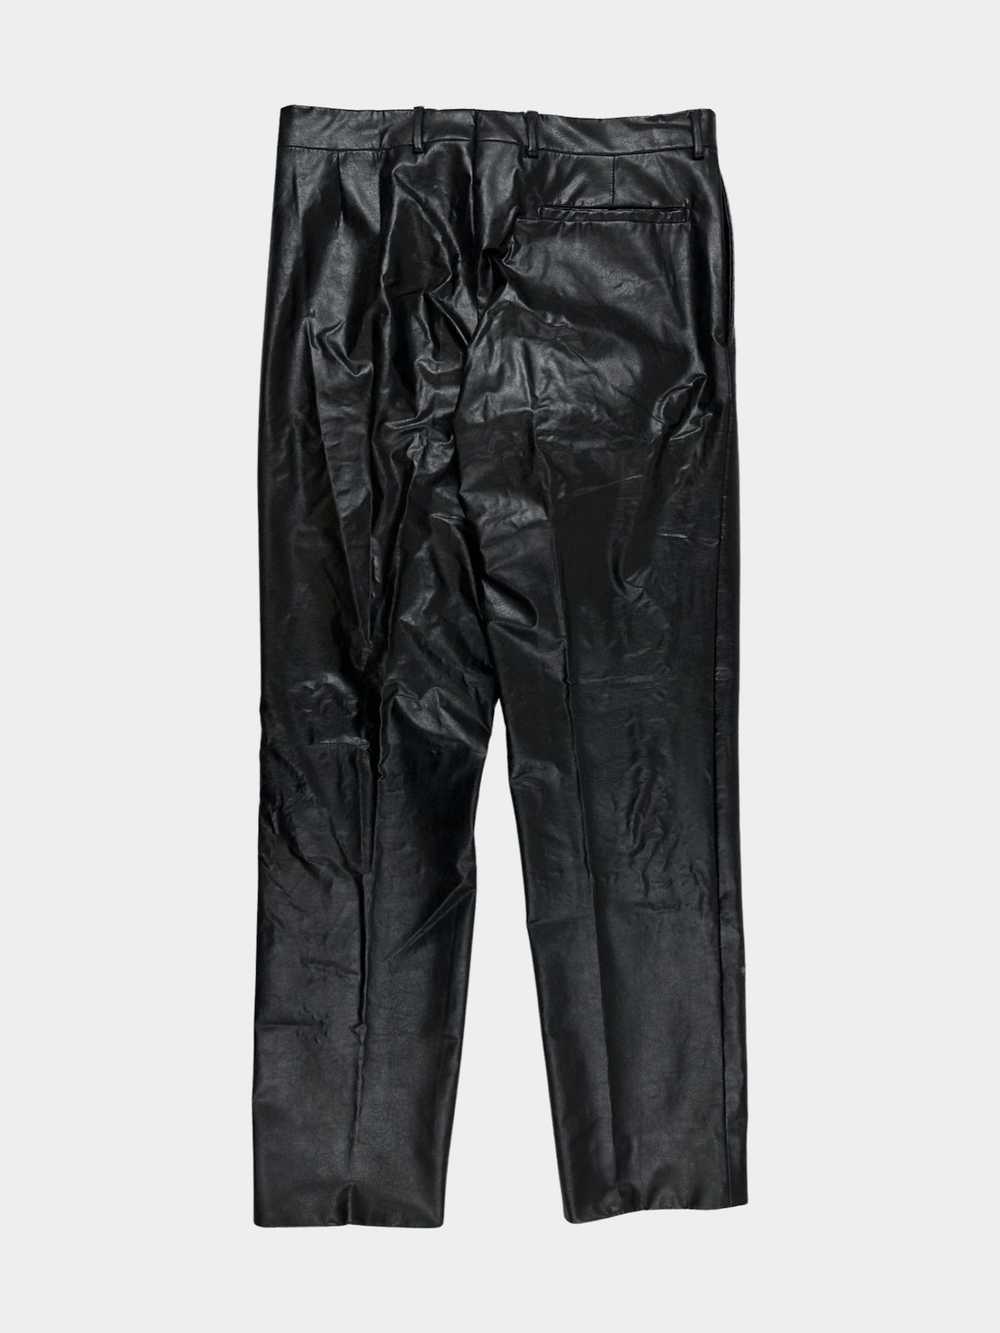 Dior AW2003 'Luster' PVC Runway Trousers - image 2